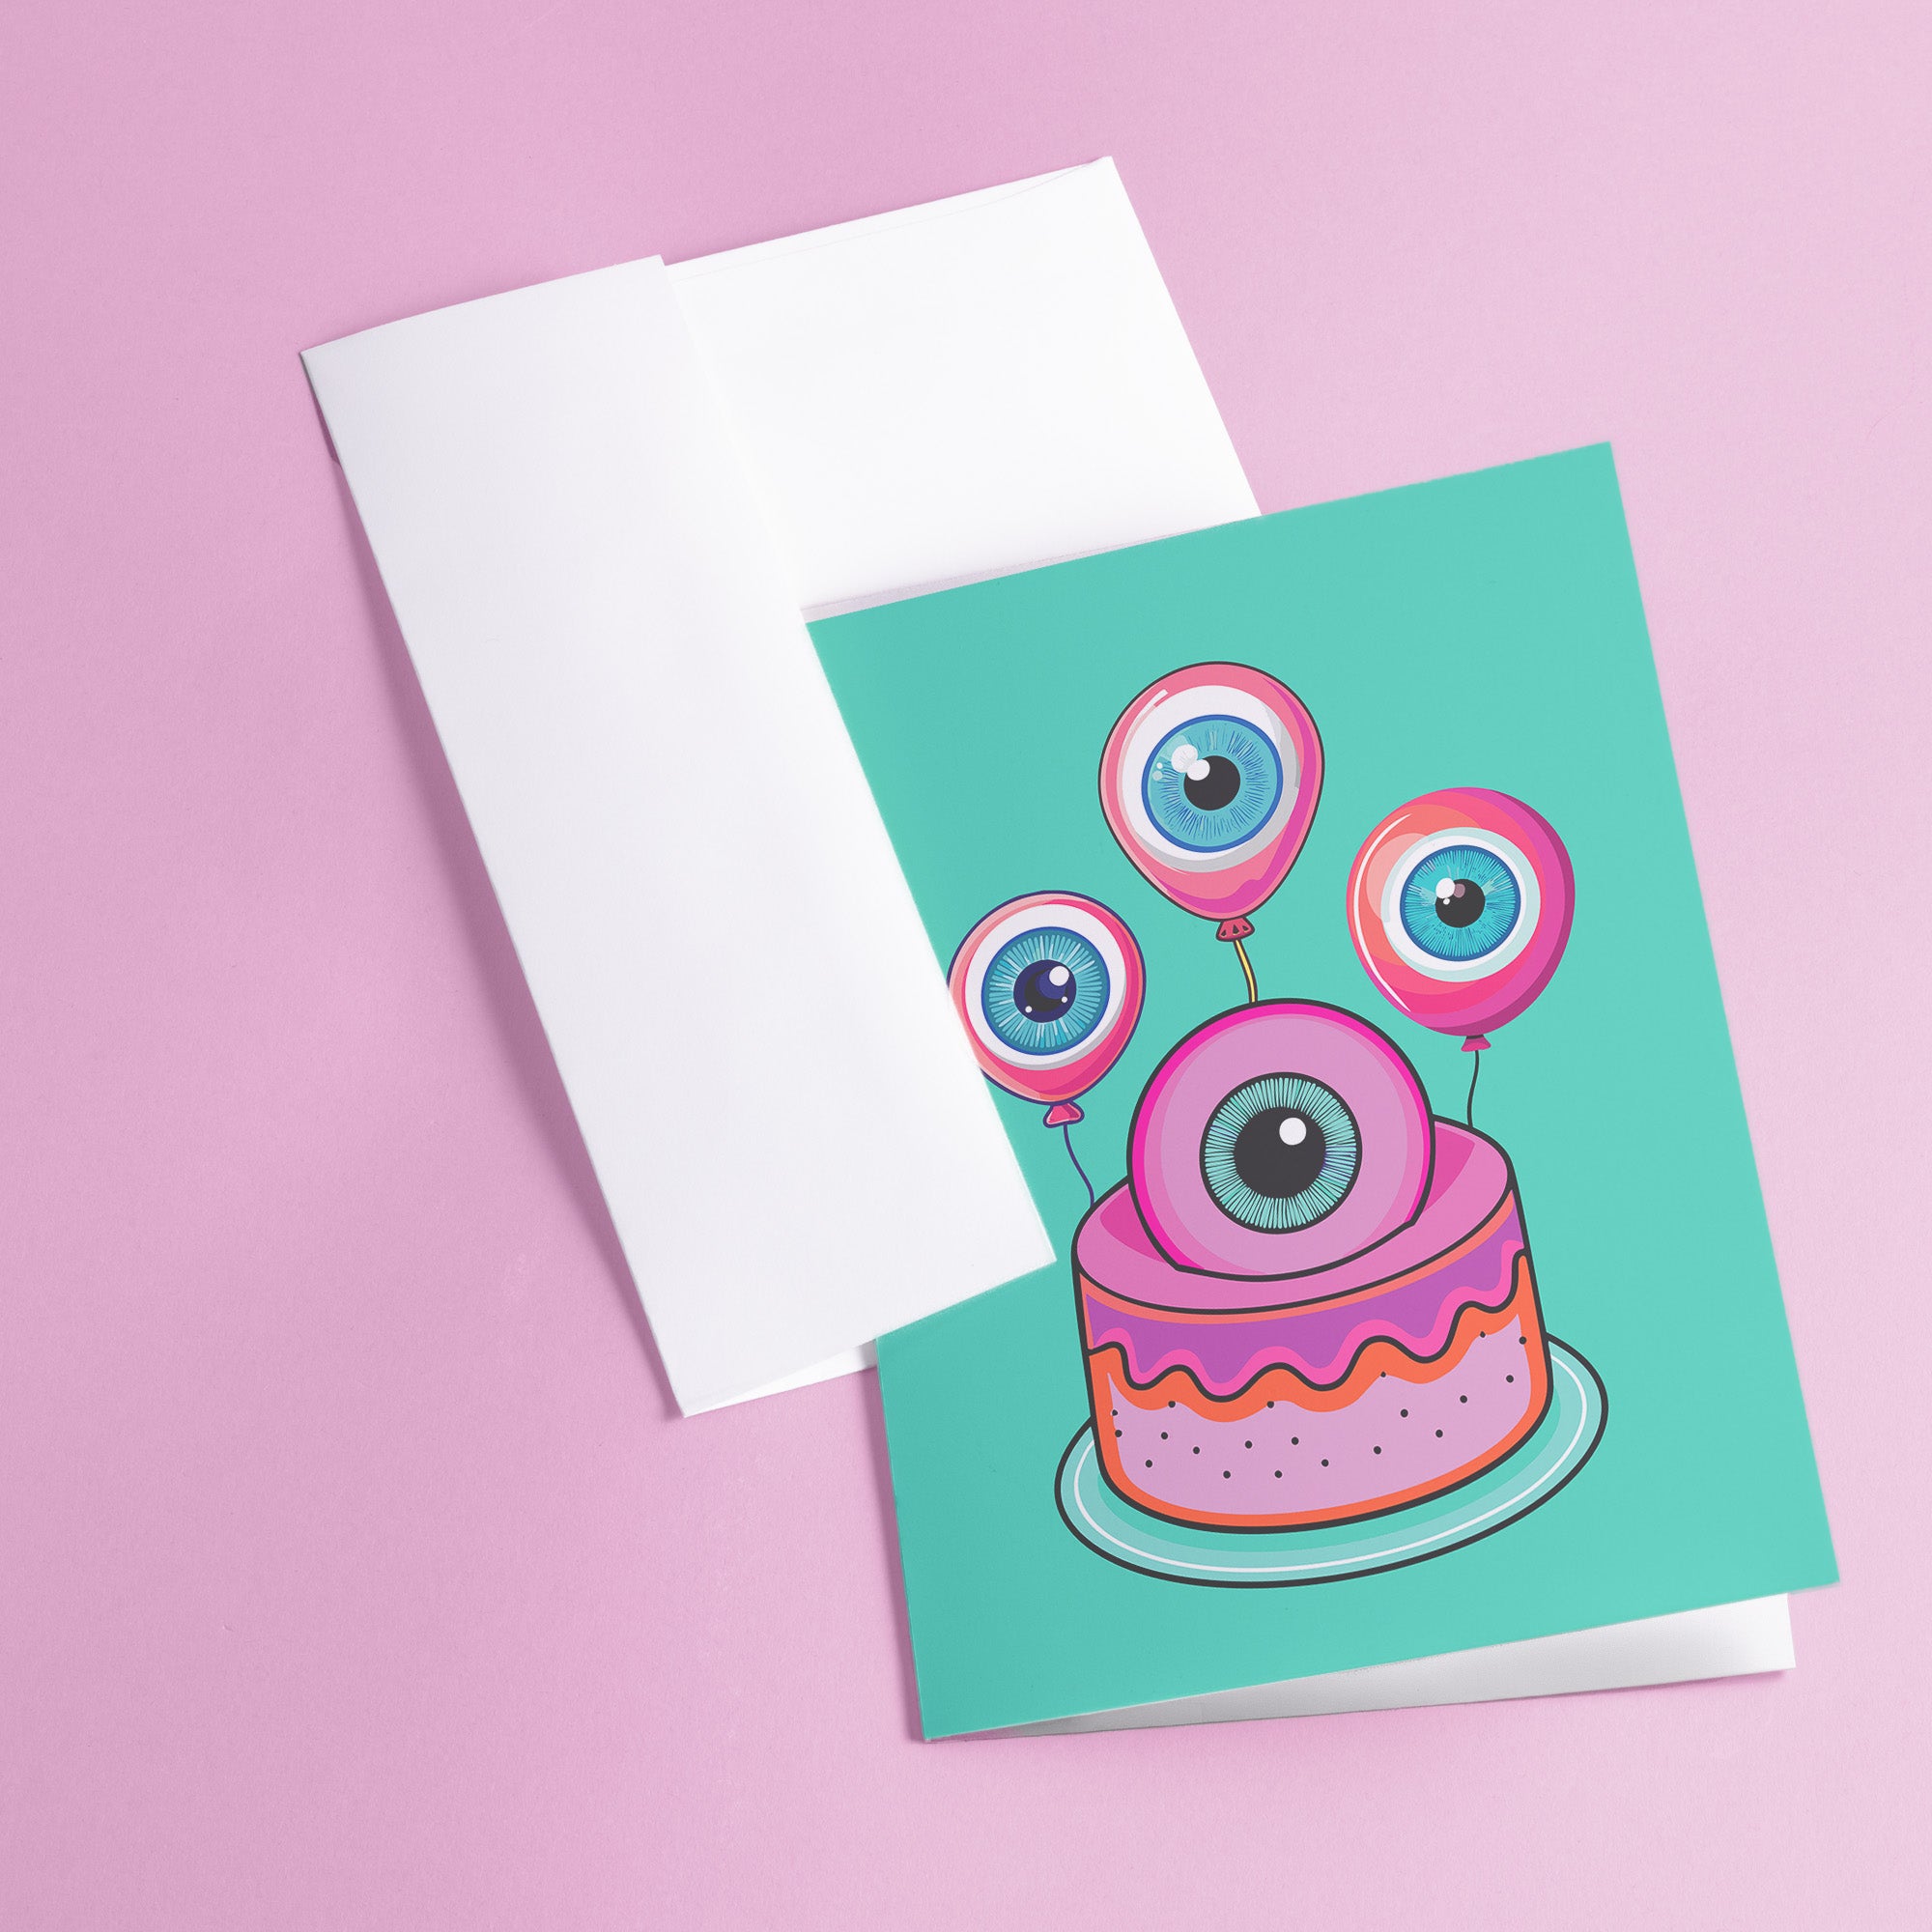 Quirky birthday card with teal background. Pink-purple cake topped by large cartoon eyeball. Three eyeball-shaped balloons float above, each with blue iris and pink edges. Inside message: 